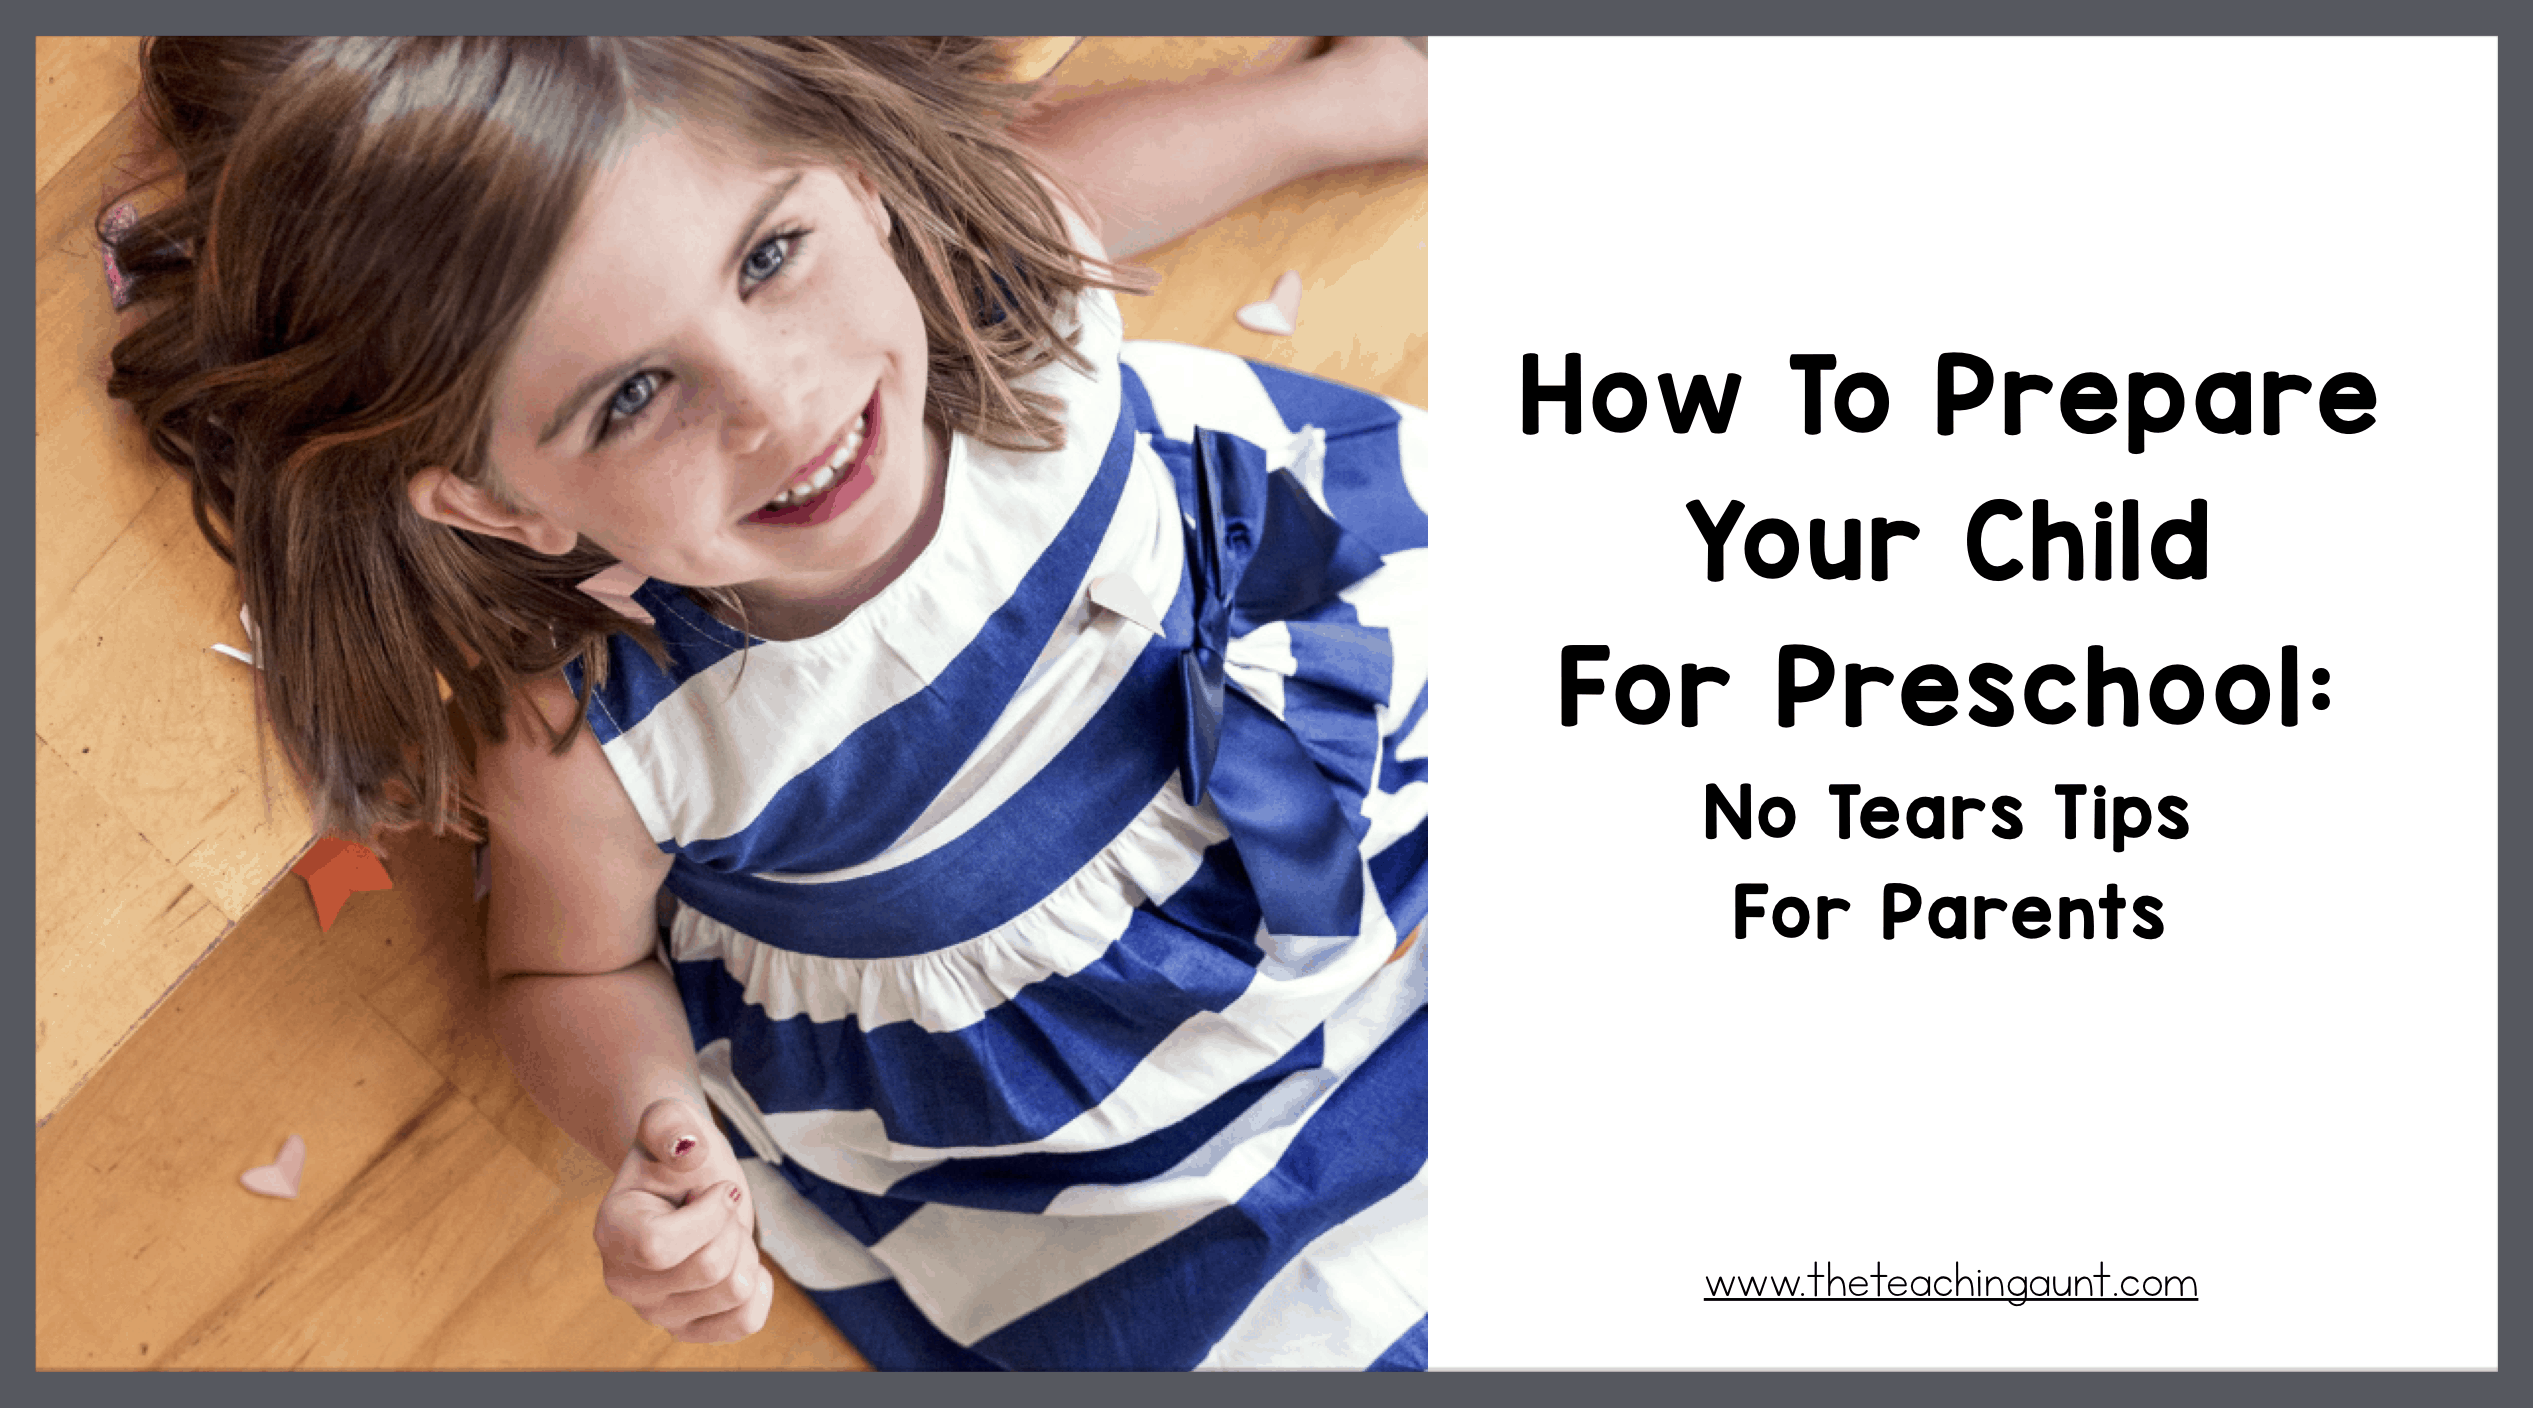 How To Prepare Your Child For Preschool: Tips for Parents